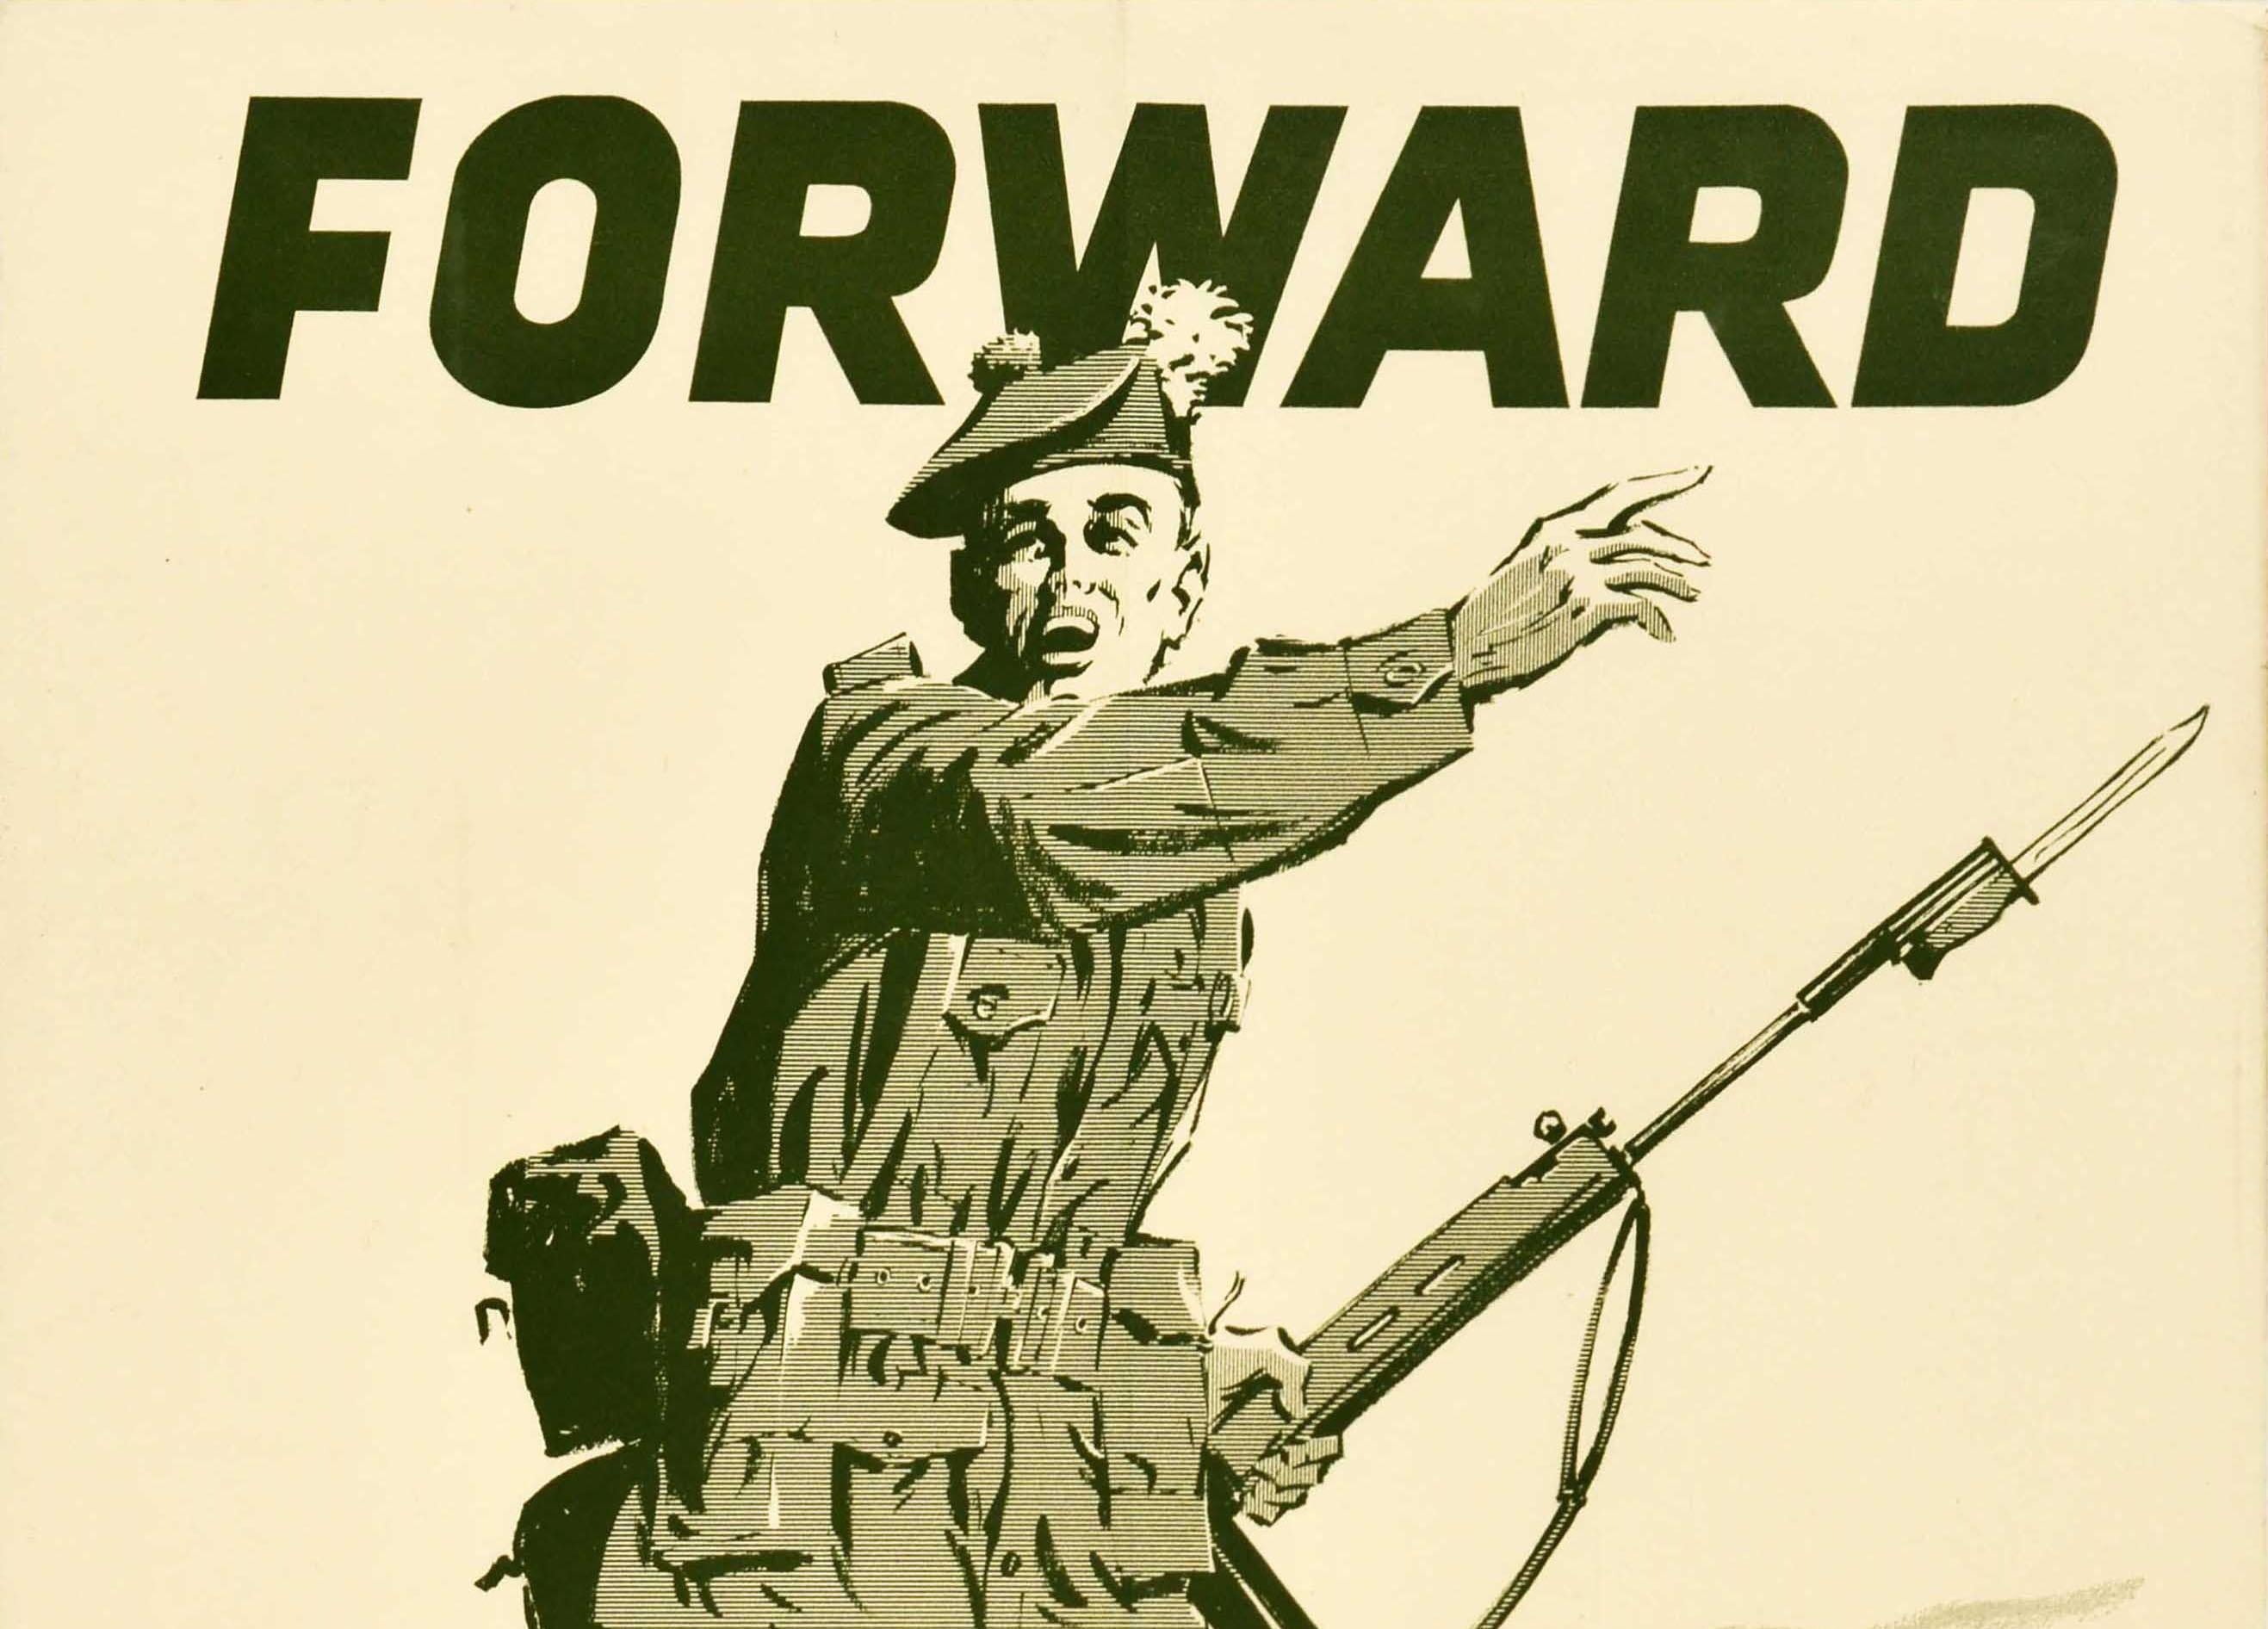 Original vintage military recruitment poster - Forward with The Royal Highland Fusiliers - featuring a soldier in uniform holding a rifle gun and calling out to the viewer, pointing the way below the word Forward in bold lettering, the rest of the